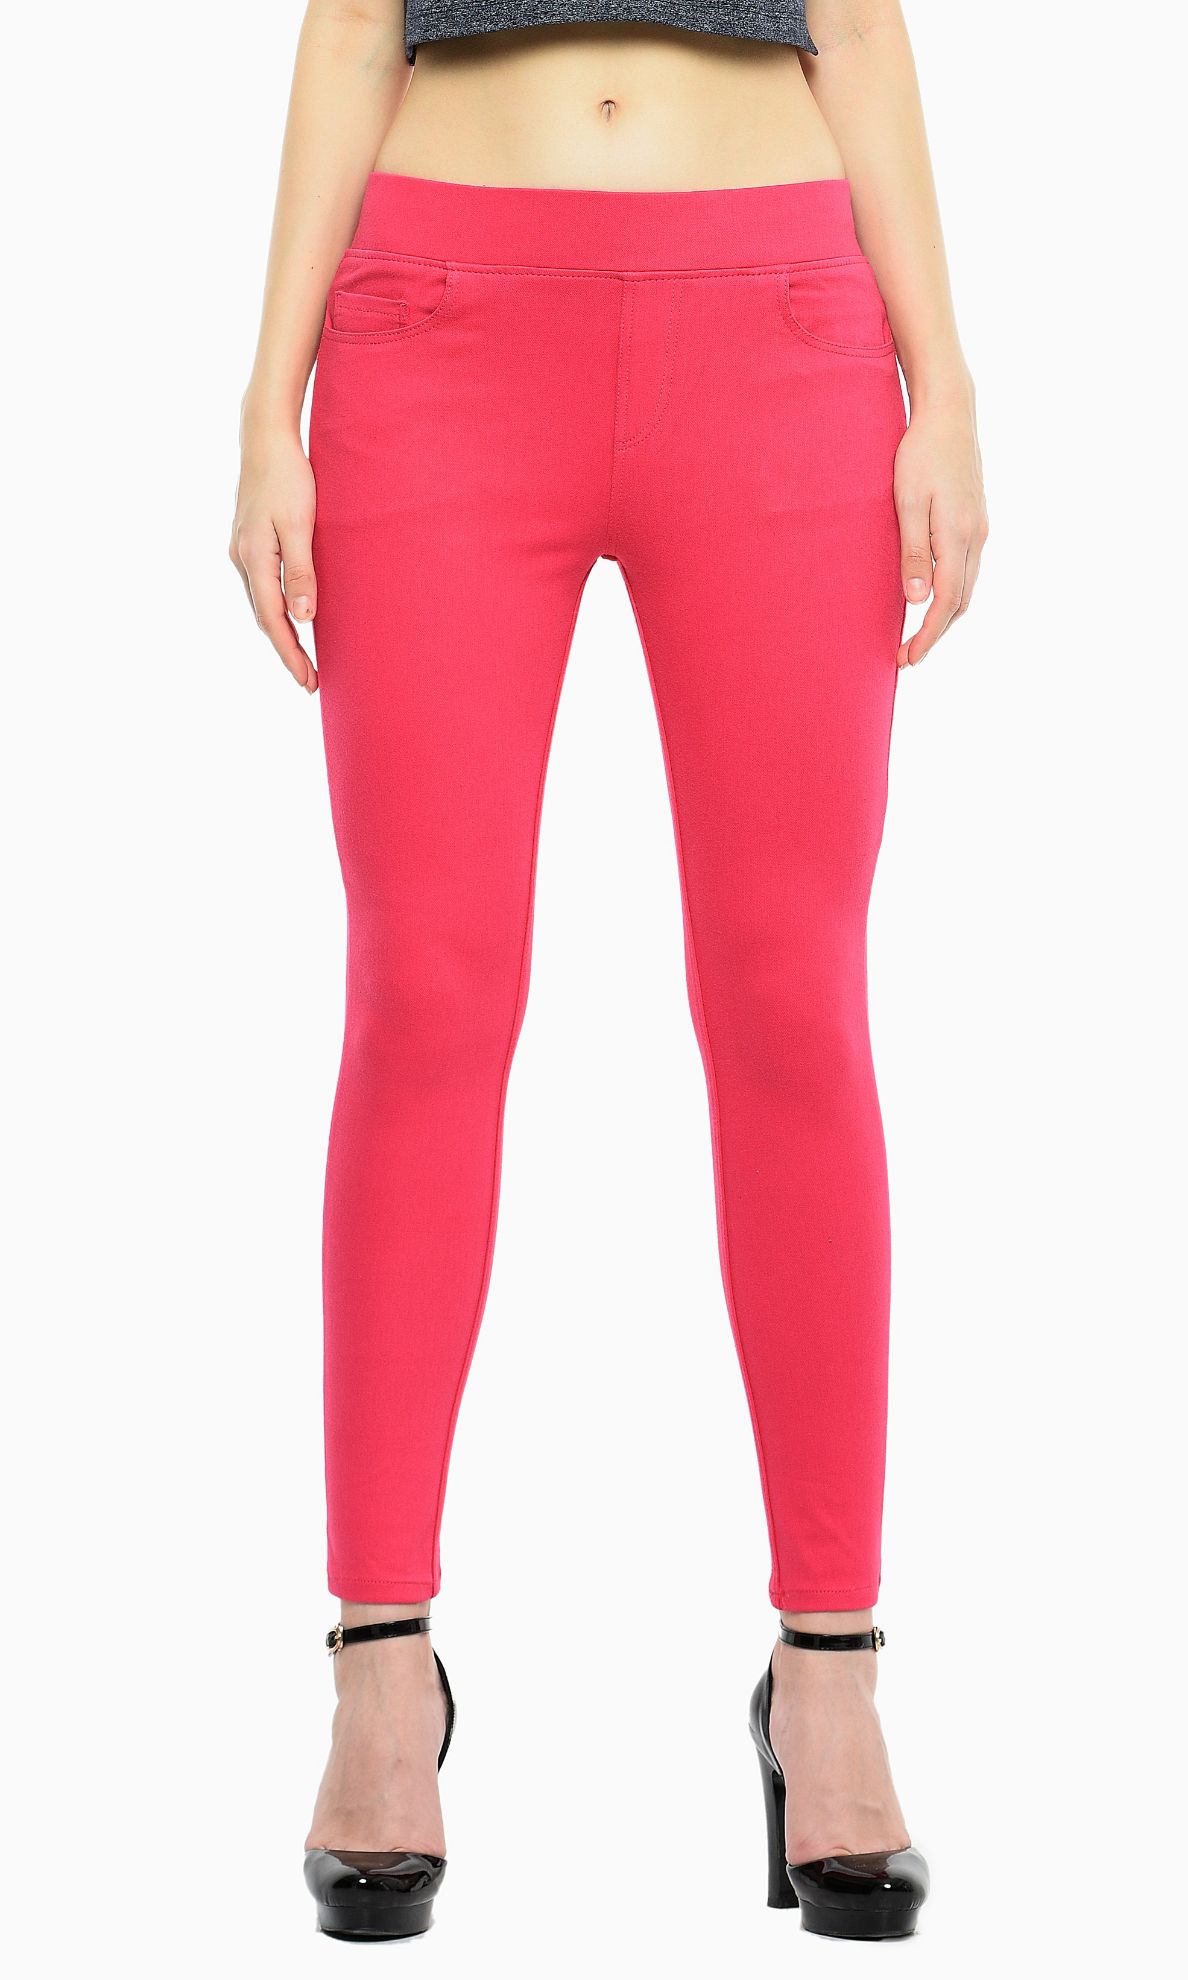 https://frenchtrendz.com/images/thumbs/0006906_frenchtrendz-cotton-viscose-spandex-pink-jeggings.jpeg